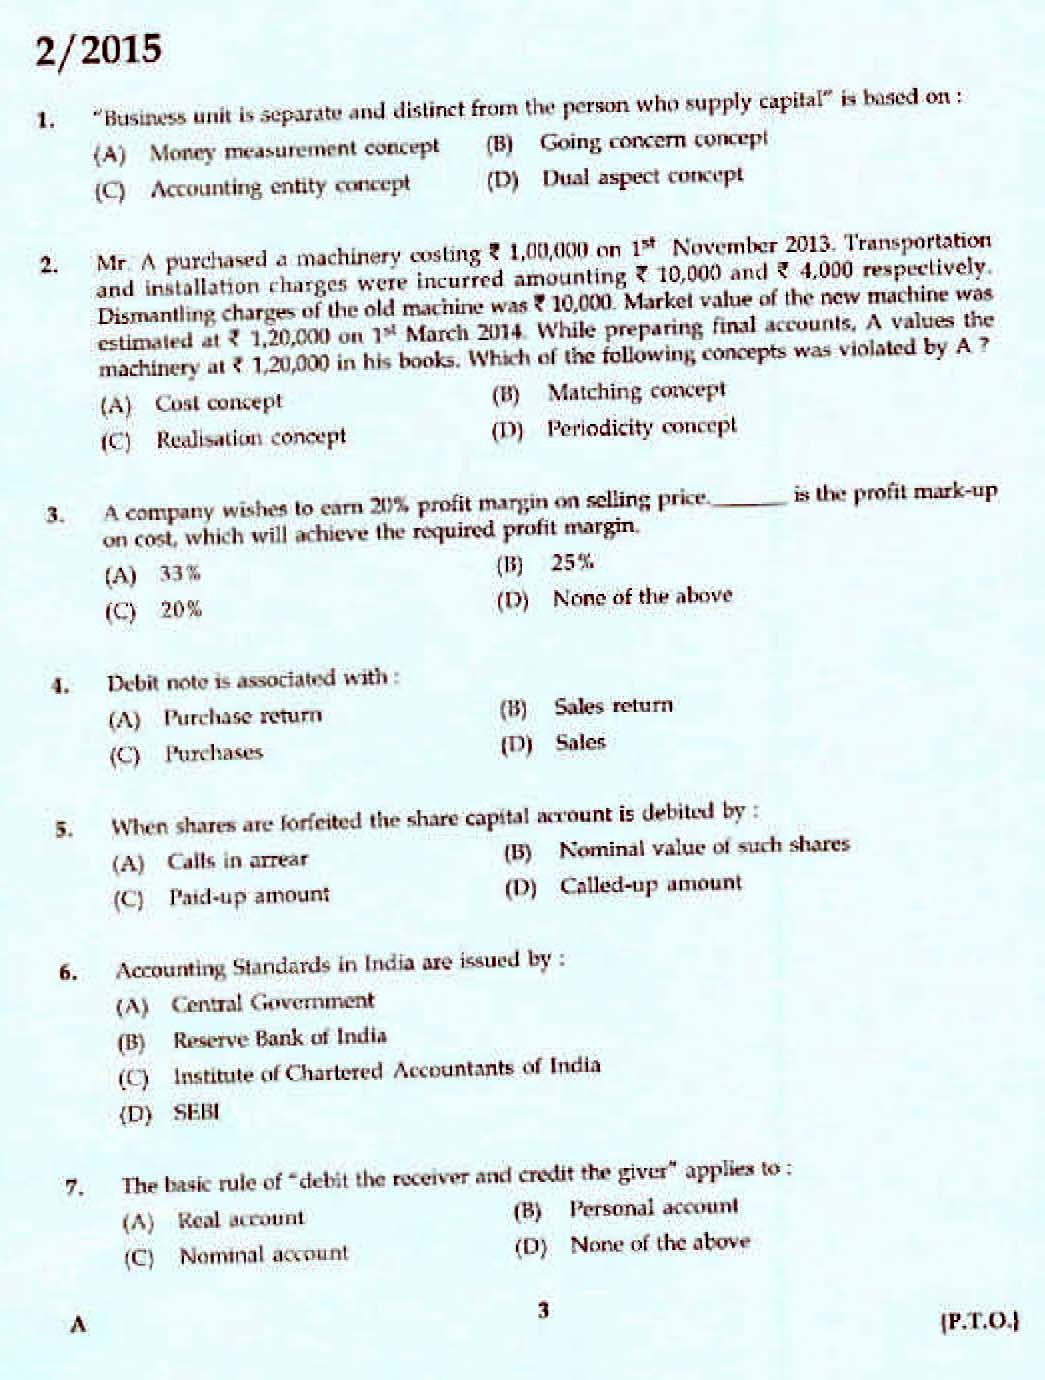 Kerala PSC Accounts Officer OMR Exam 2015 Question Paper Code 22015 1